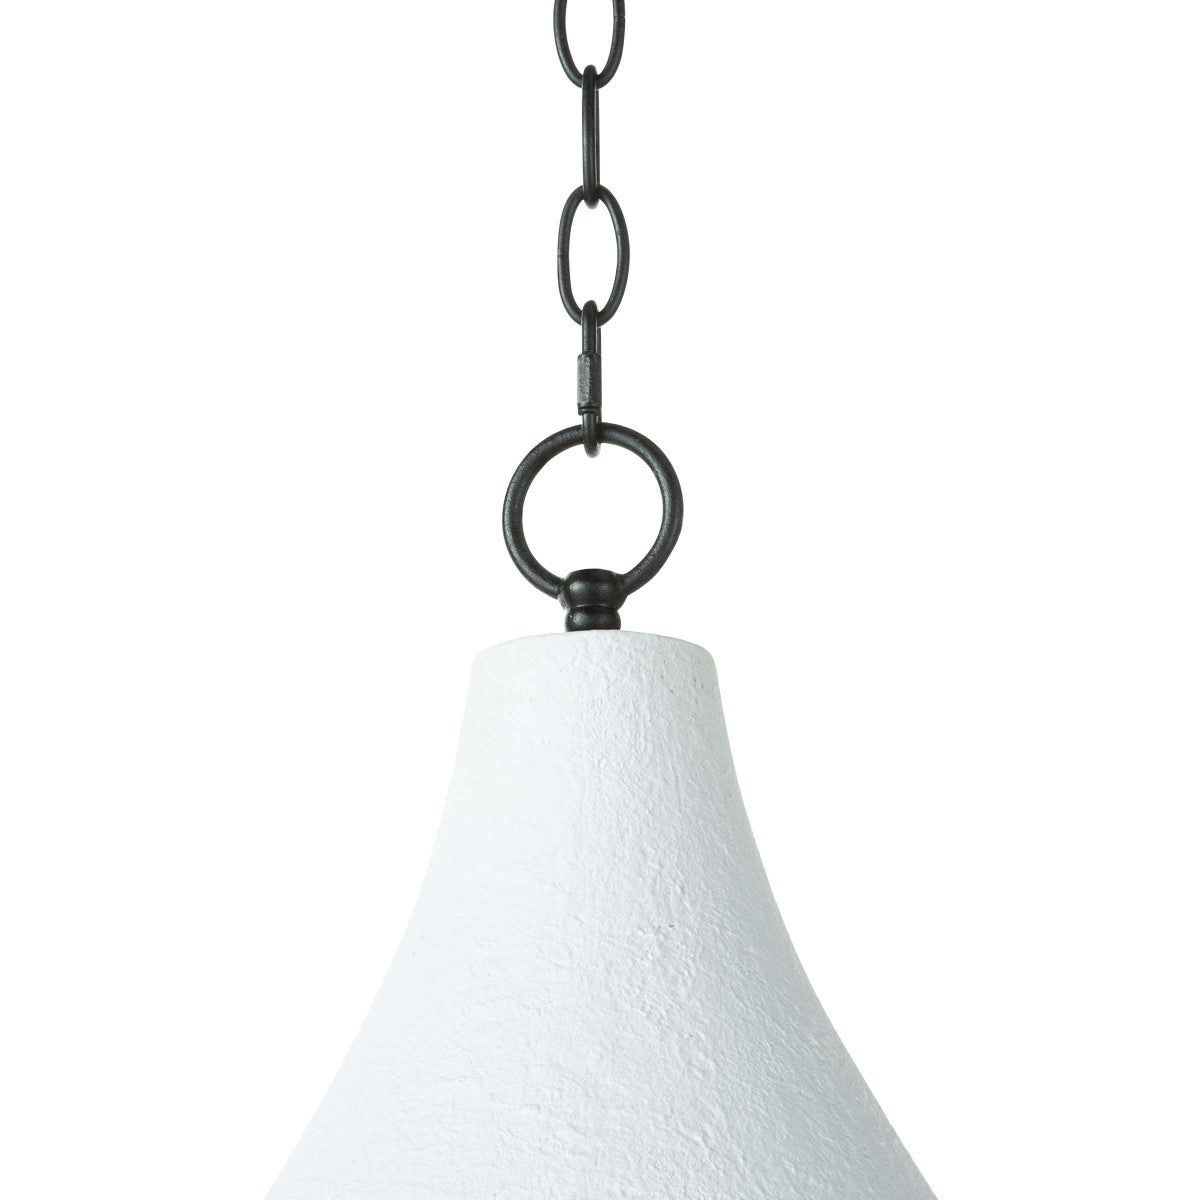 We love the distinctive, rough texture of the Billie Small Concrete Pendant. It brings charm to a kitchen island or sink in a rustic farmhouse or a contemporary loft vibe.   Size: 10.5"w x 10.5"d x 16"h Material: Concrete